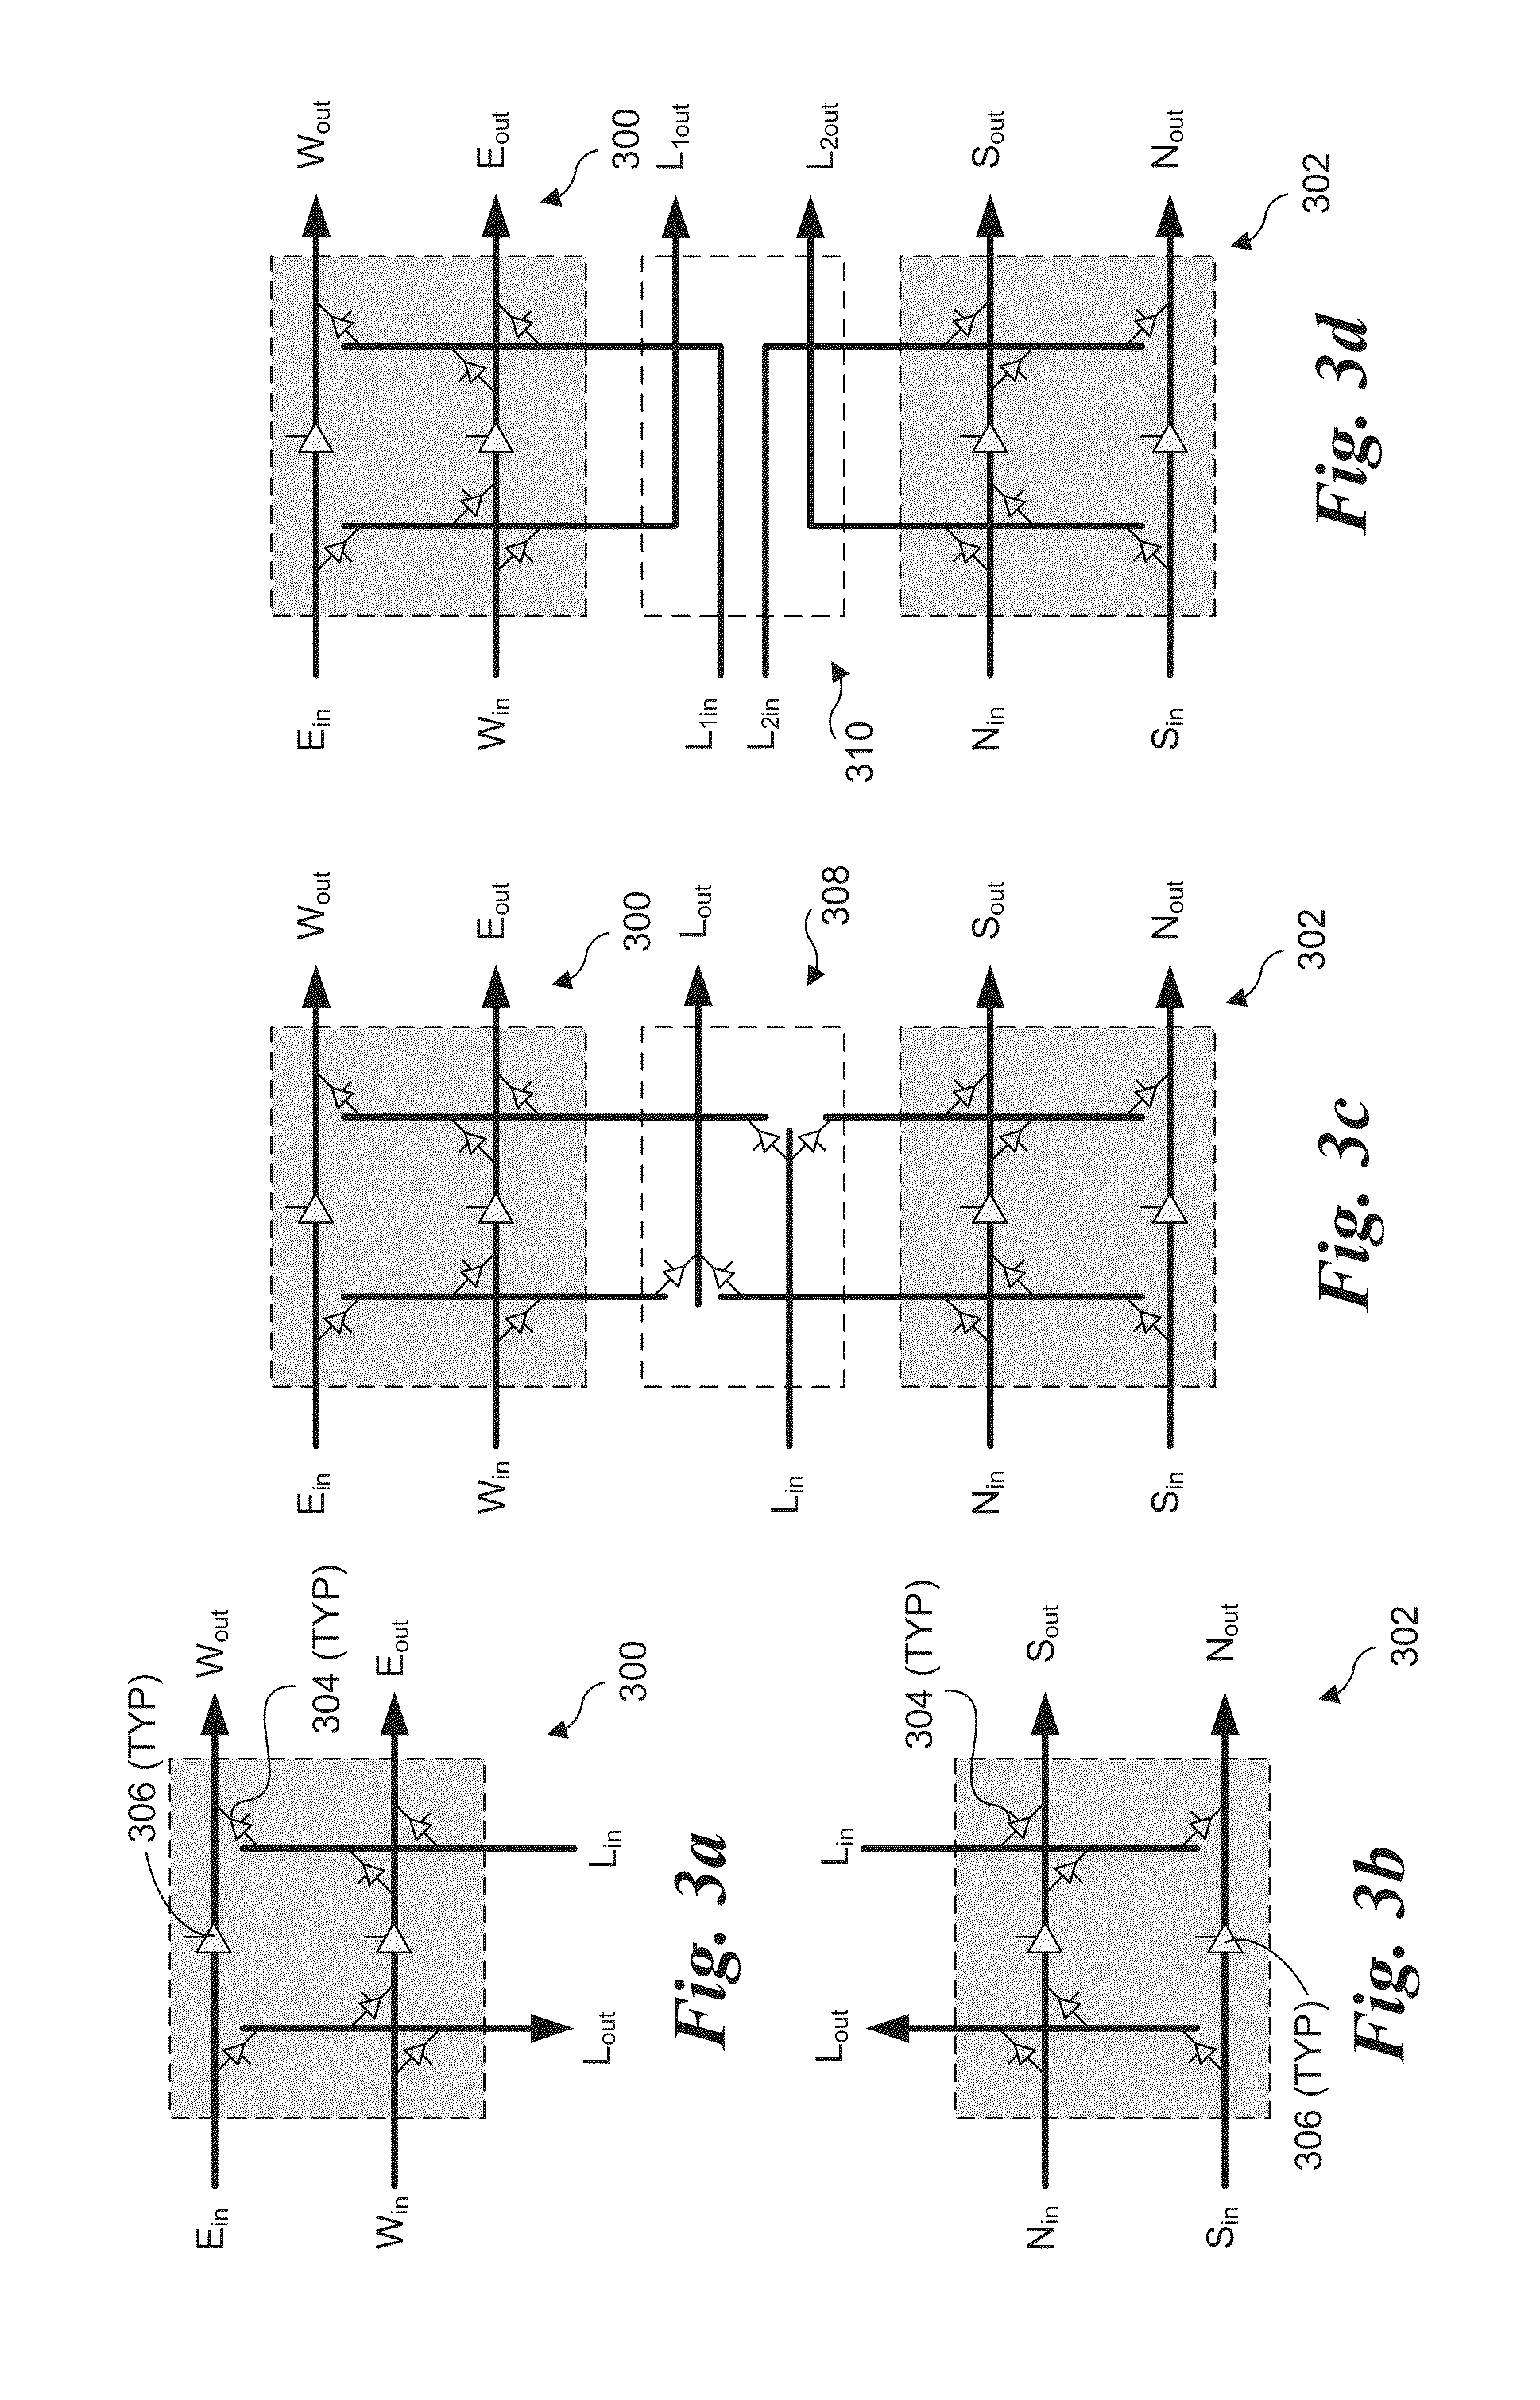 Modular decoupled crossbar for on-chip router